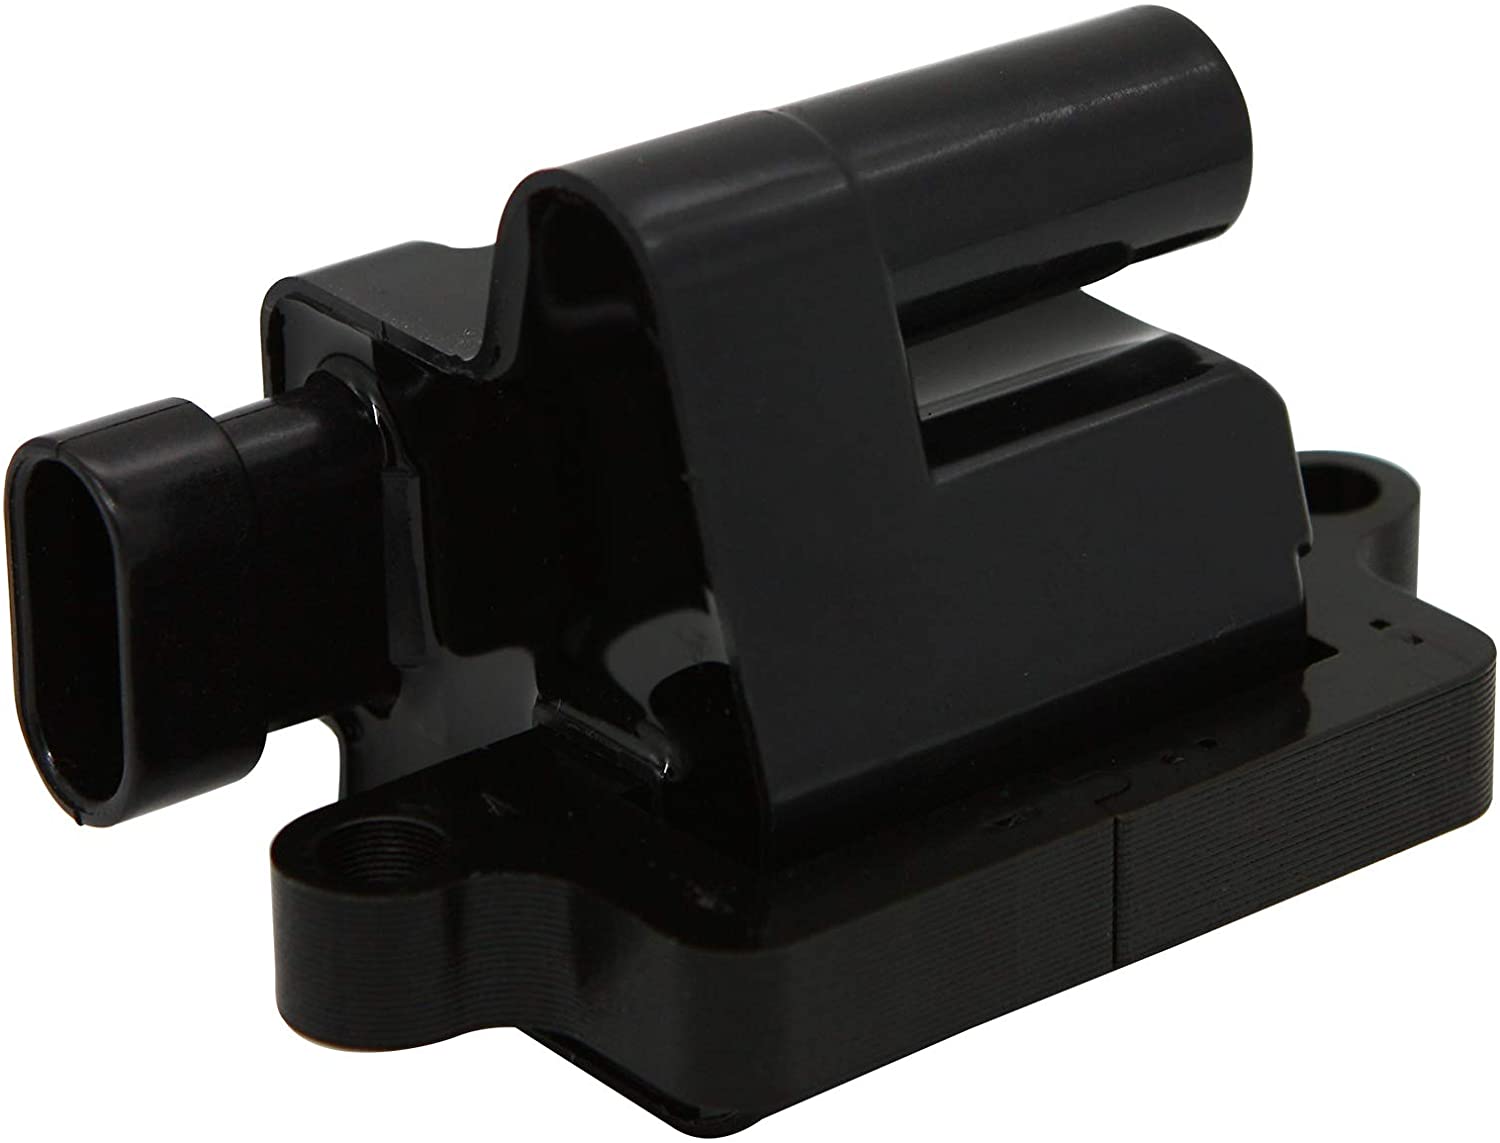 Sikawai Ignition Coil Pack Replaces 12558693,5C1083,GN10298,D581 Compatible with Chevy,GMC & Cadillac Vehicles - Escalade,Silverado, Avalanche,Express 3500,Suburban,Tahoe,Sierra,Savana,Yukon Replaces